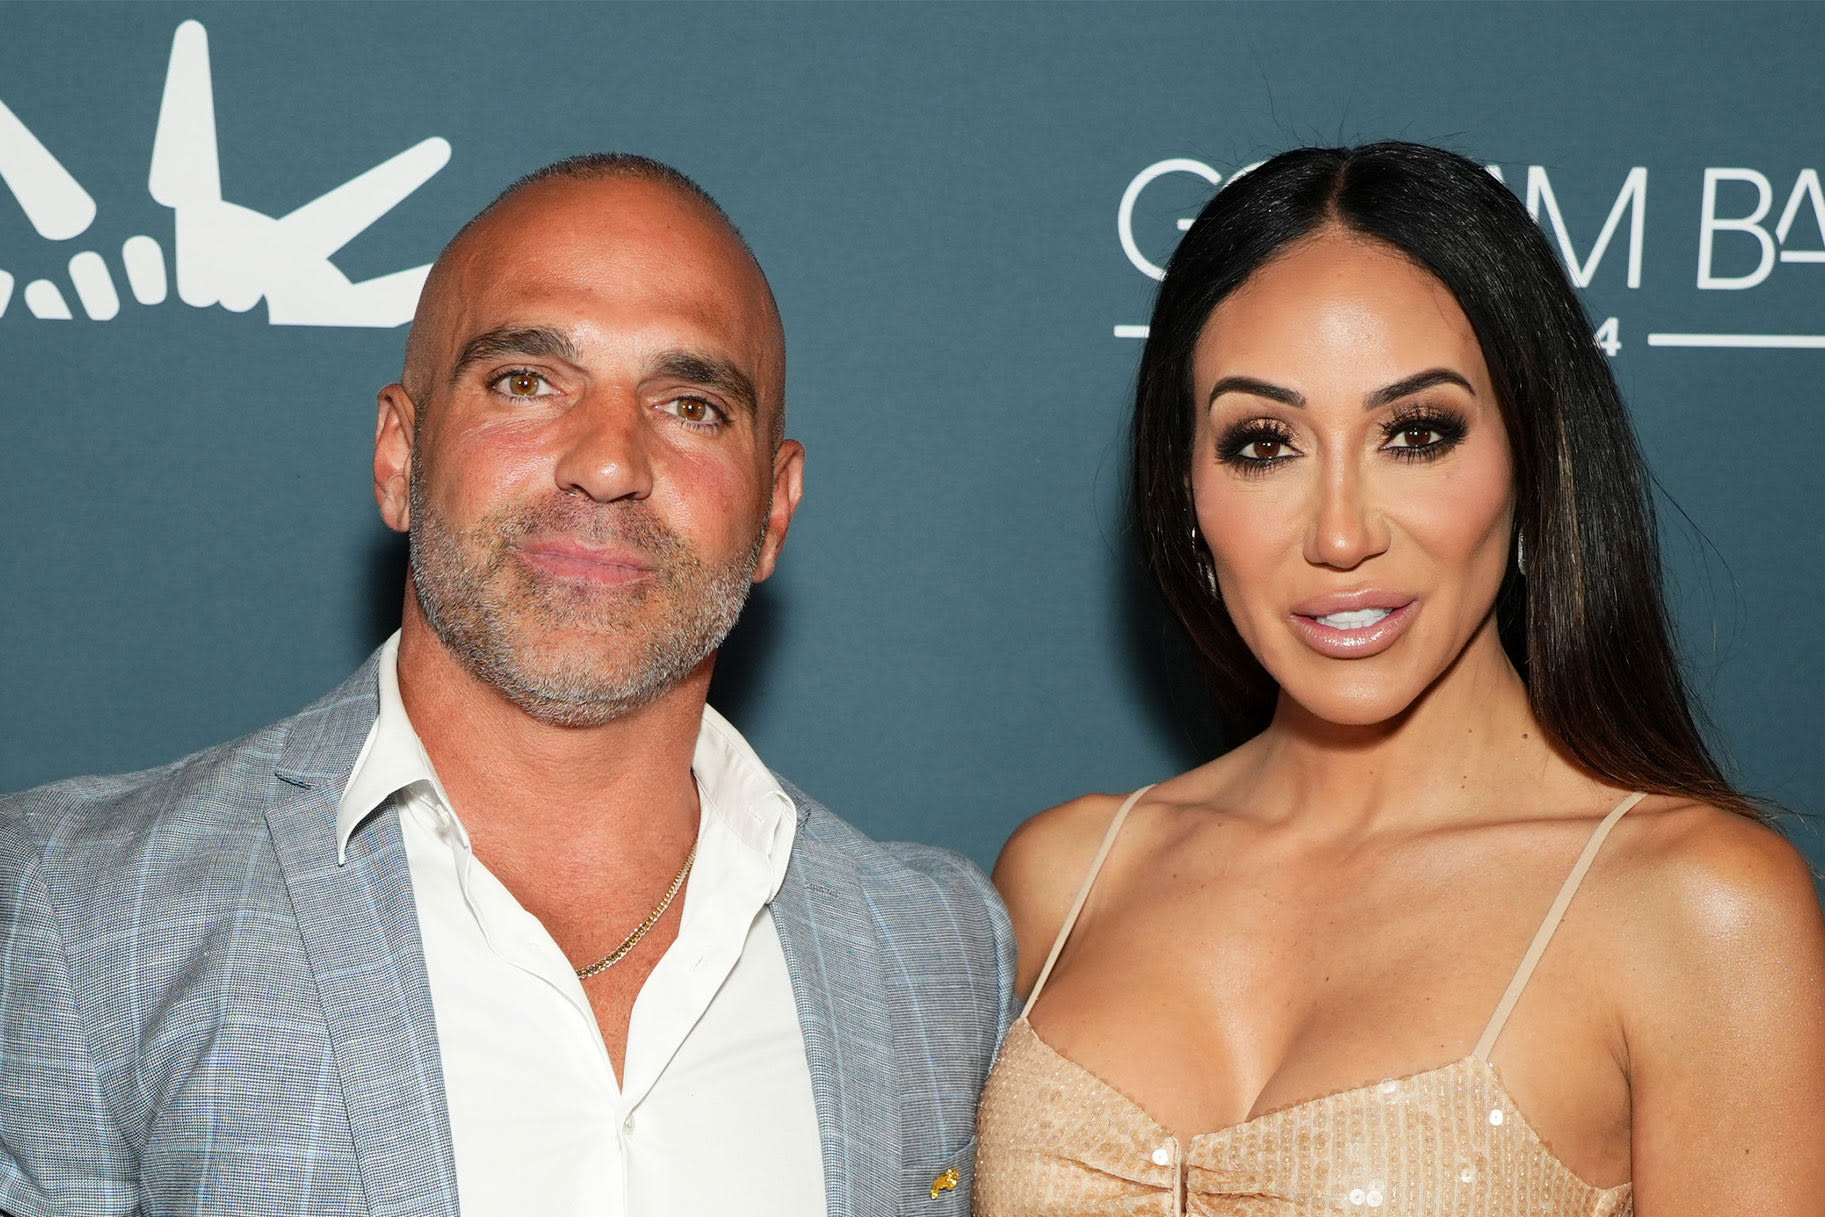 Joe Gorga Emotionally Reflects on His Rift with Teresa: "I'm Not Gonna Be There" | Bravo TV Official Site